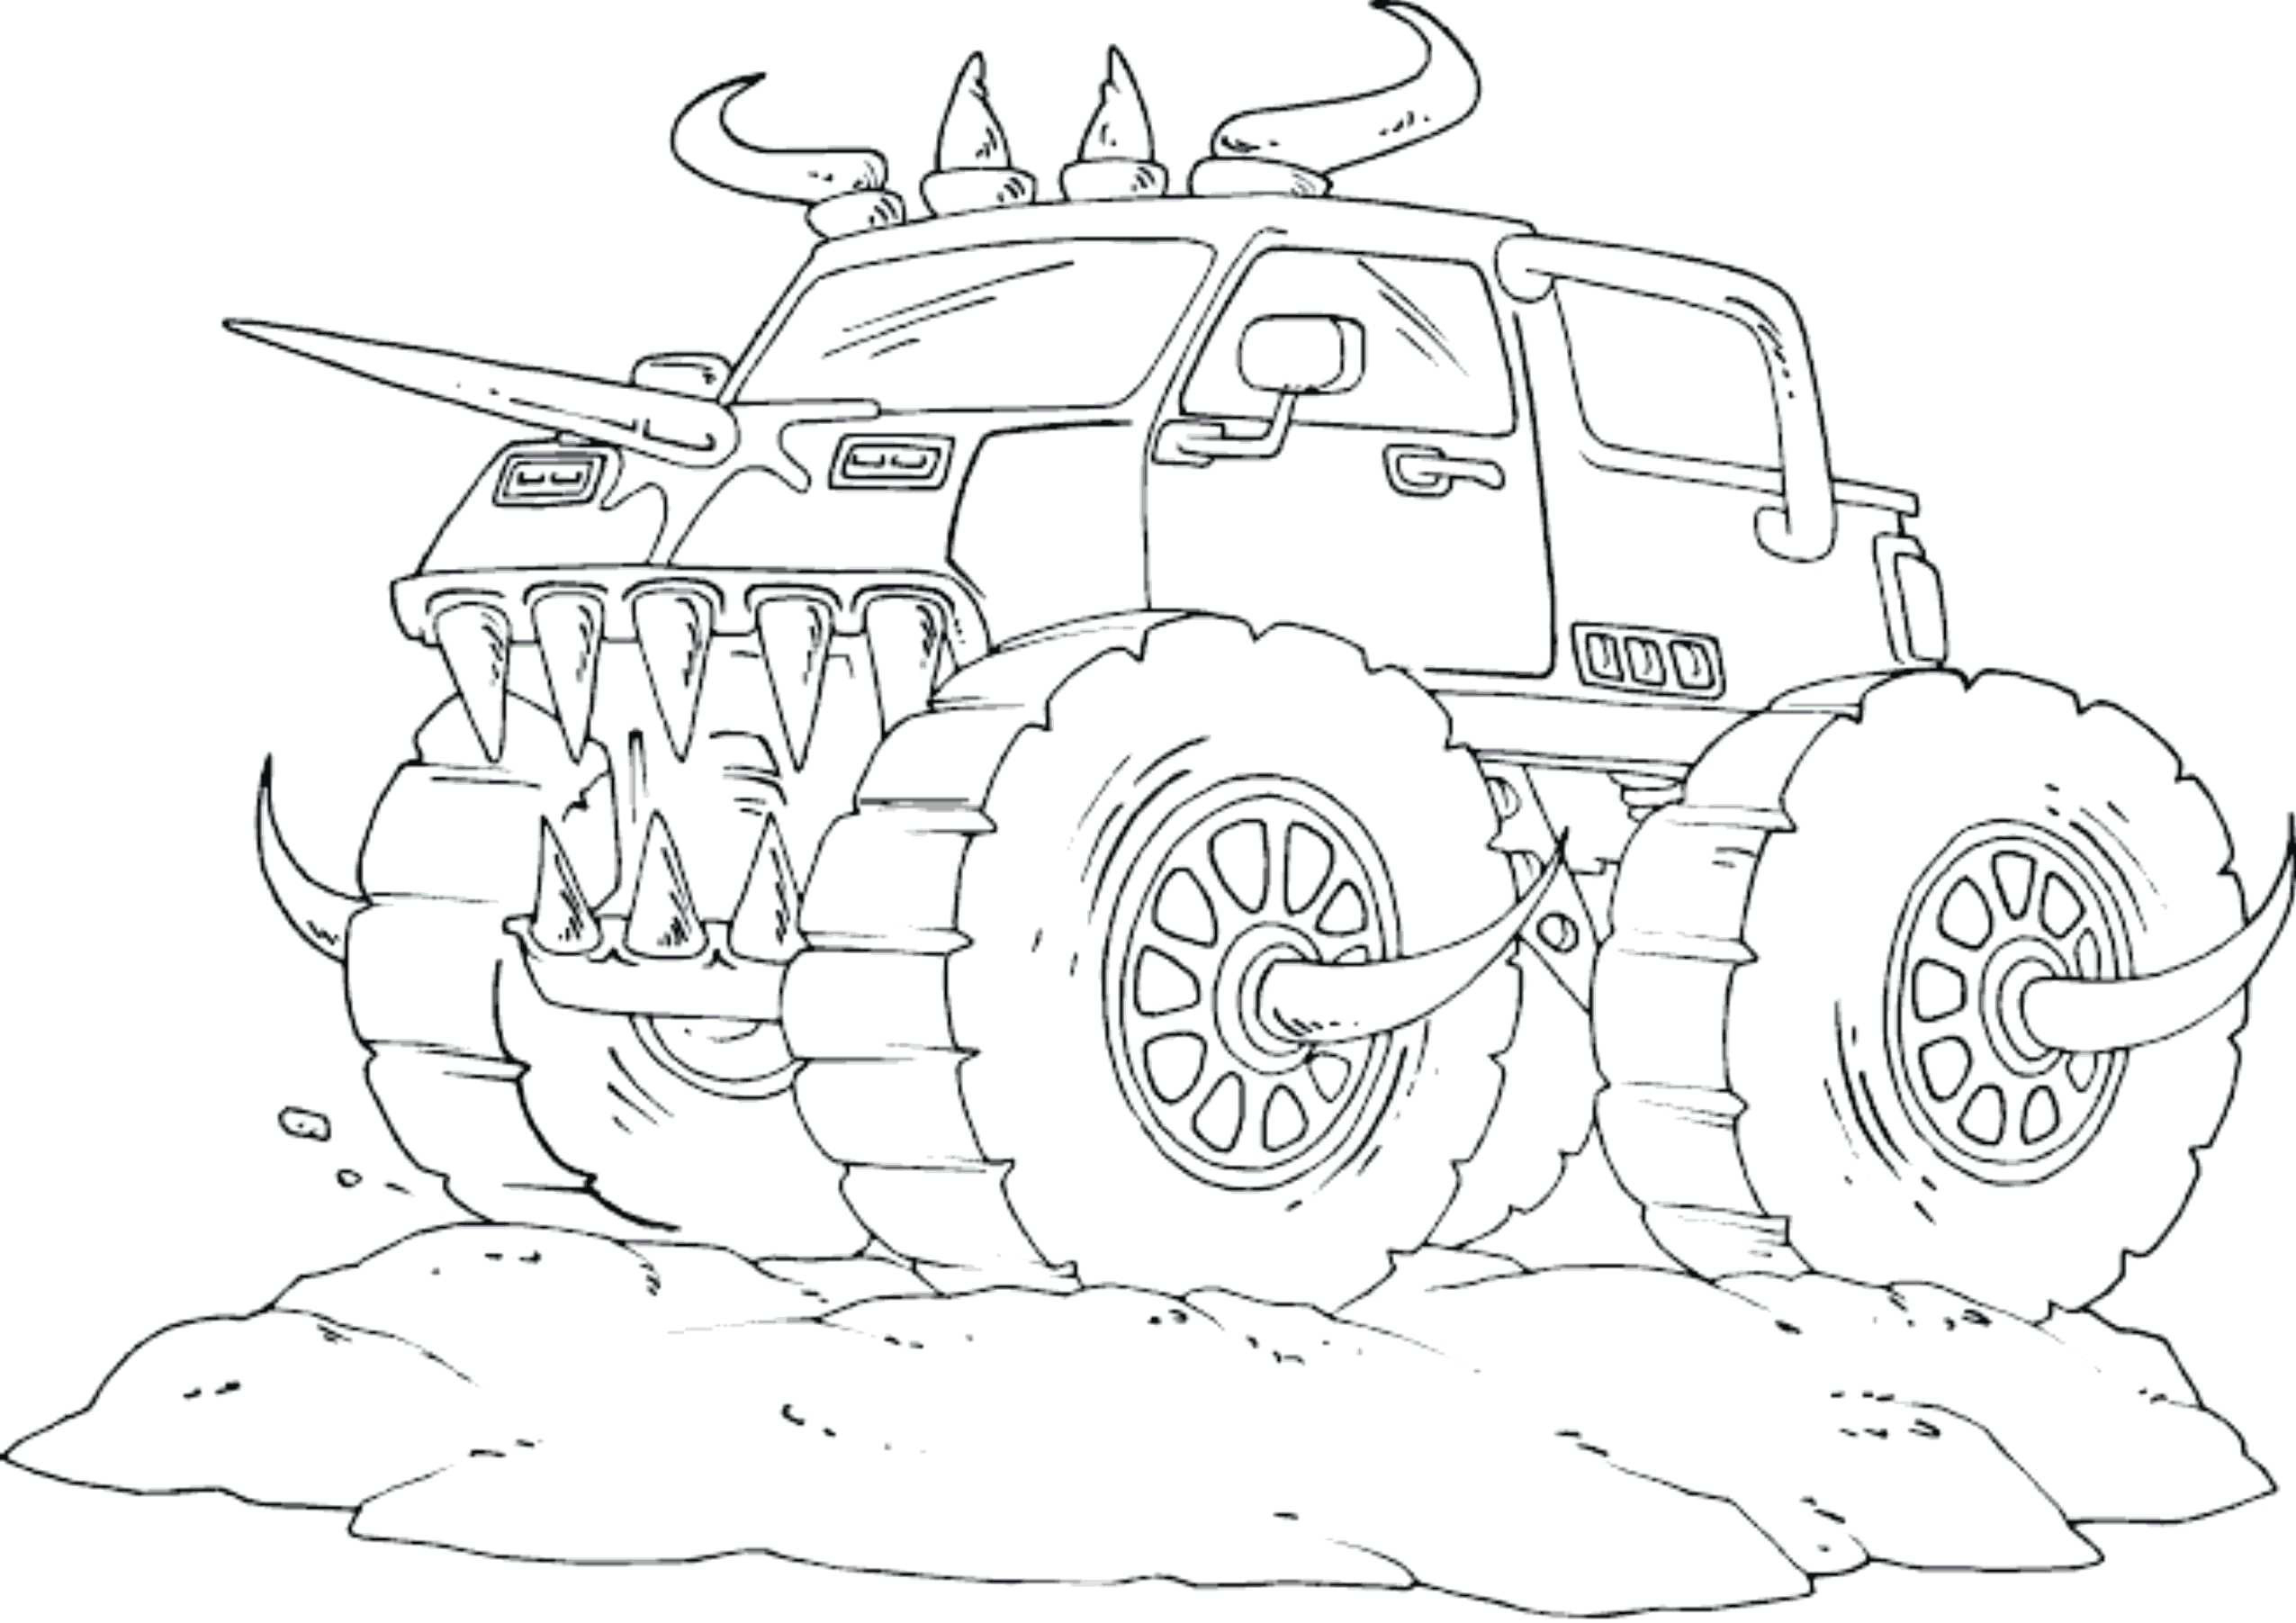 Big Truck Coloring Pages Gmc Truck Coloring Pages At Getdrawings Free For Personal Use